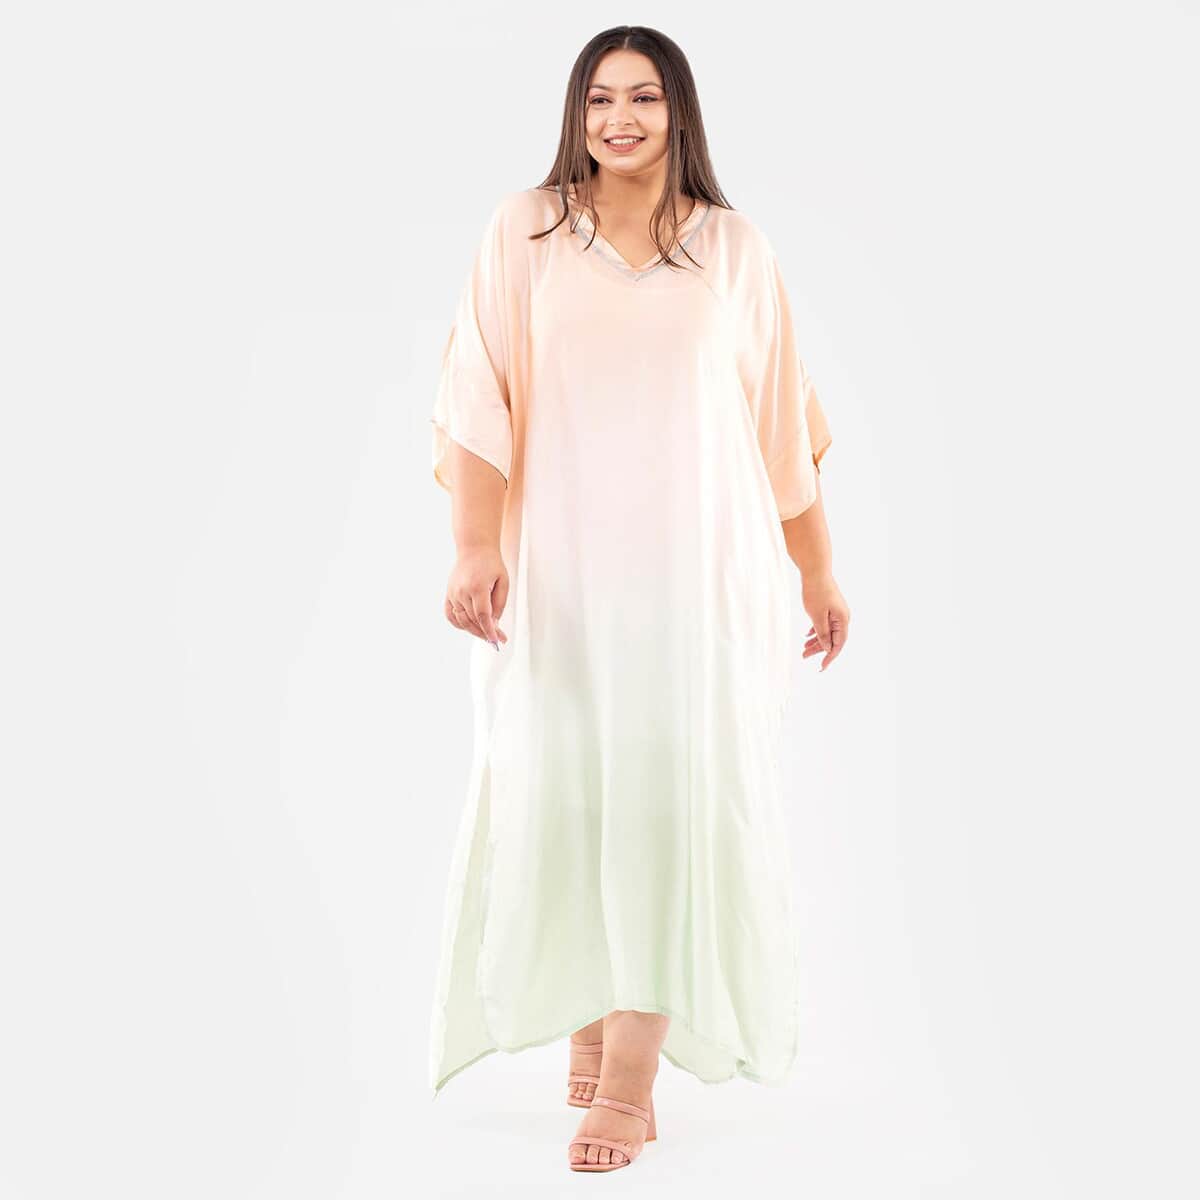 TAMSY Peach Tie-Dye Long Kaftan with Lace - One Size Fits Most image number 2